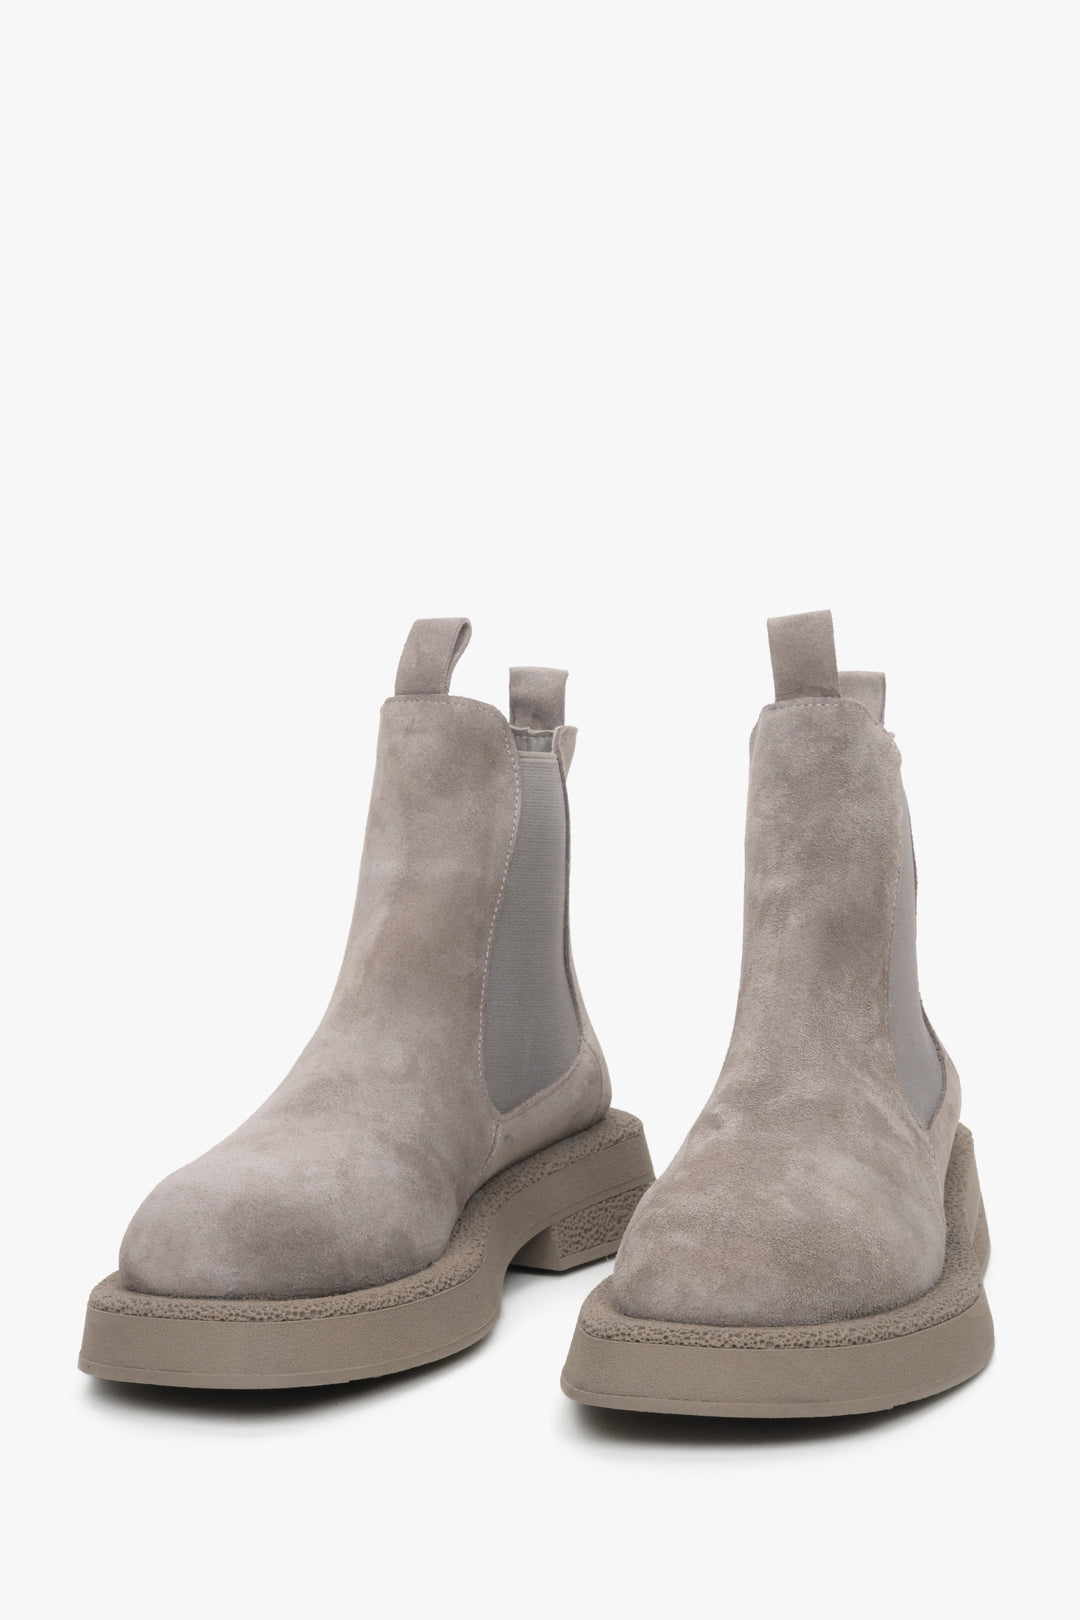 Women's grey Chelsea boots made of genuine suede - a close-up on tip of the shoe.